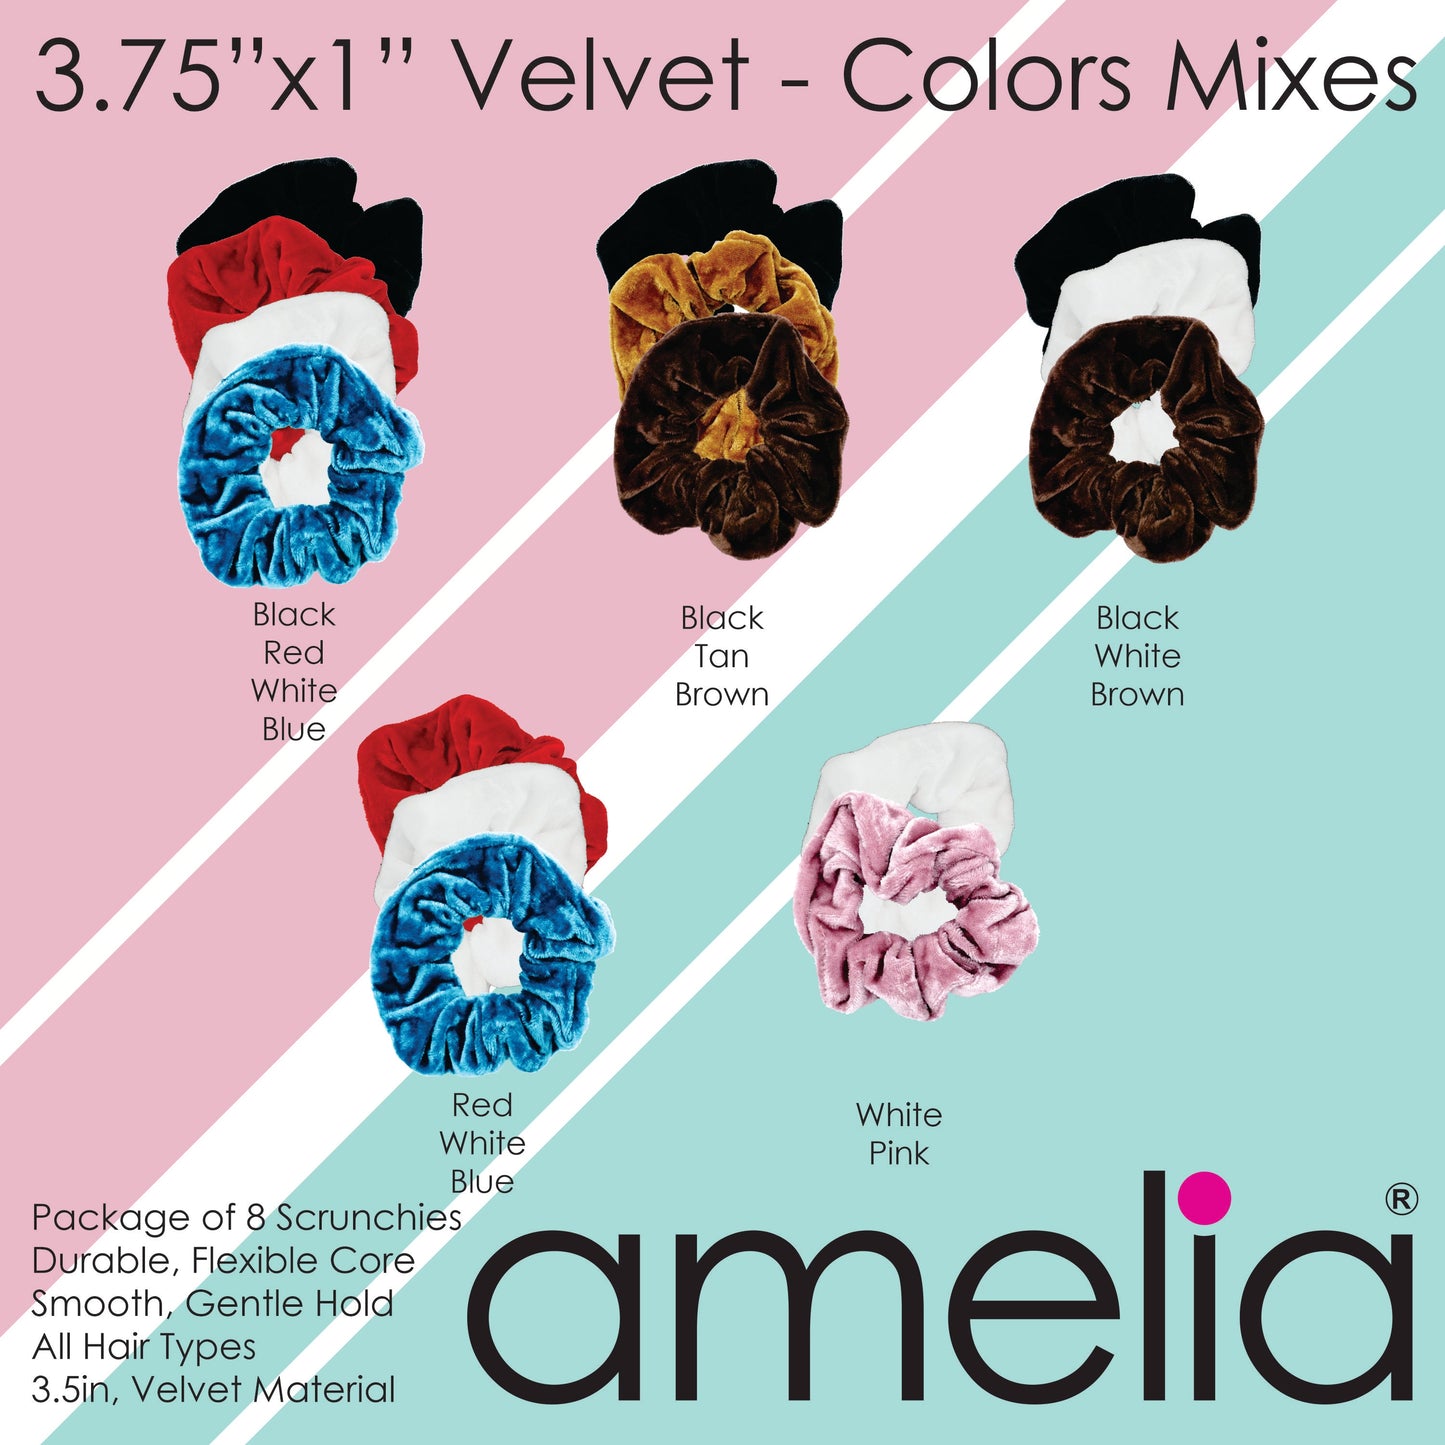 Amelia Beauty Products, Blue Velvet Velvet Scrunchies, 3.5in Diameter, Gentle on Hair, Strong Hold, No Snag, No Dents or Creases. 8 Pack - 12 Retail Packs